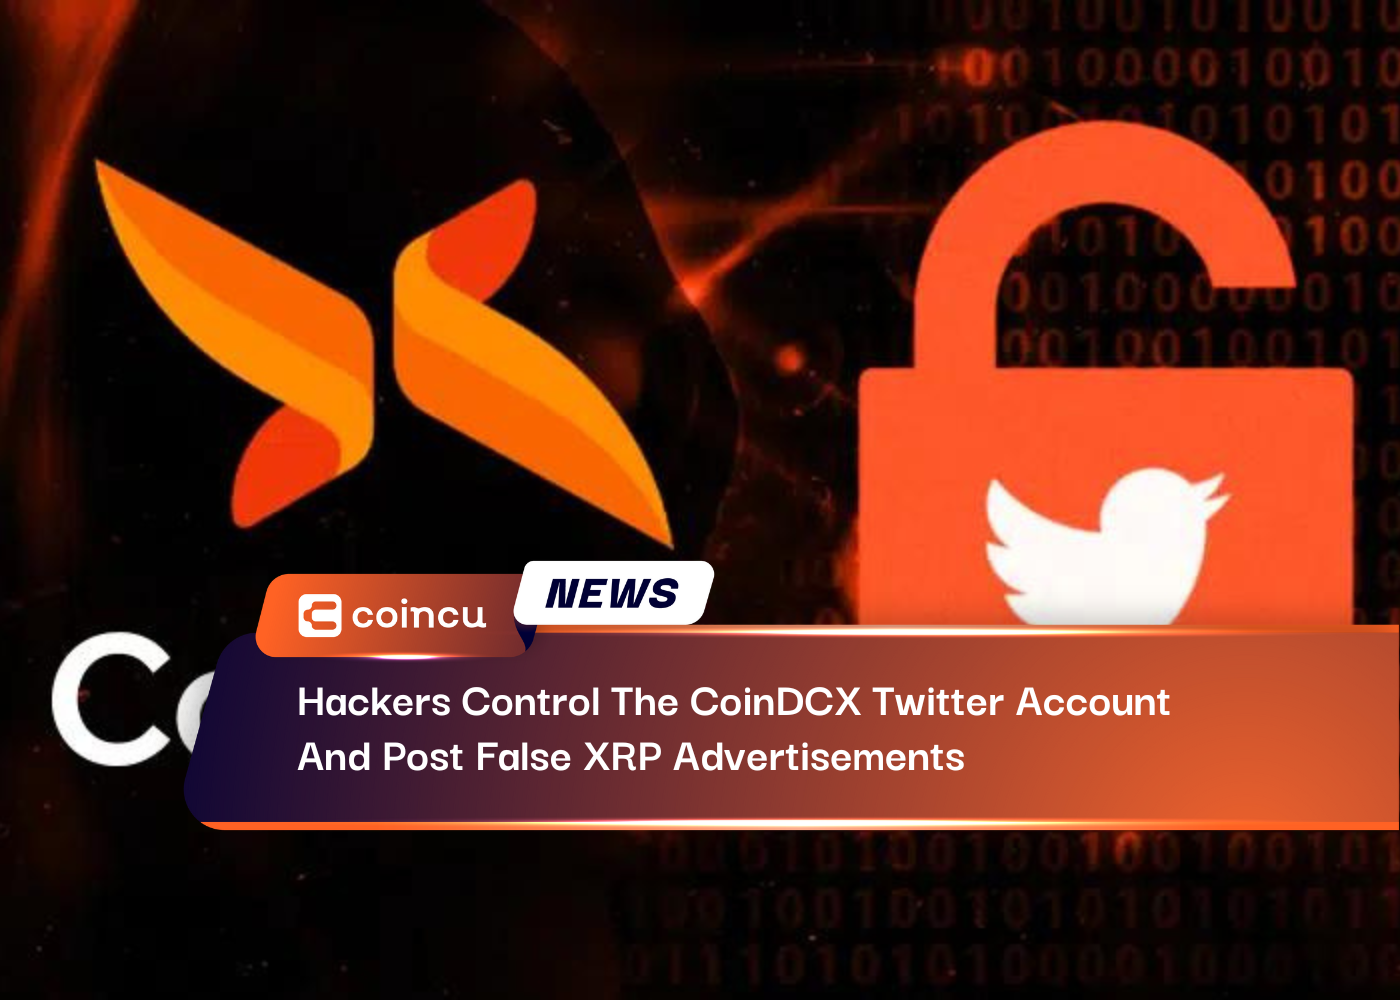 Hackers Control The CoinDCX Twitter Account